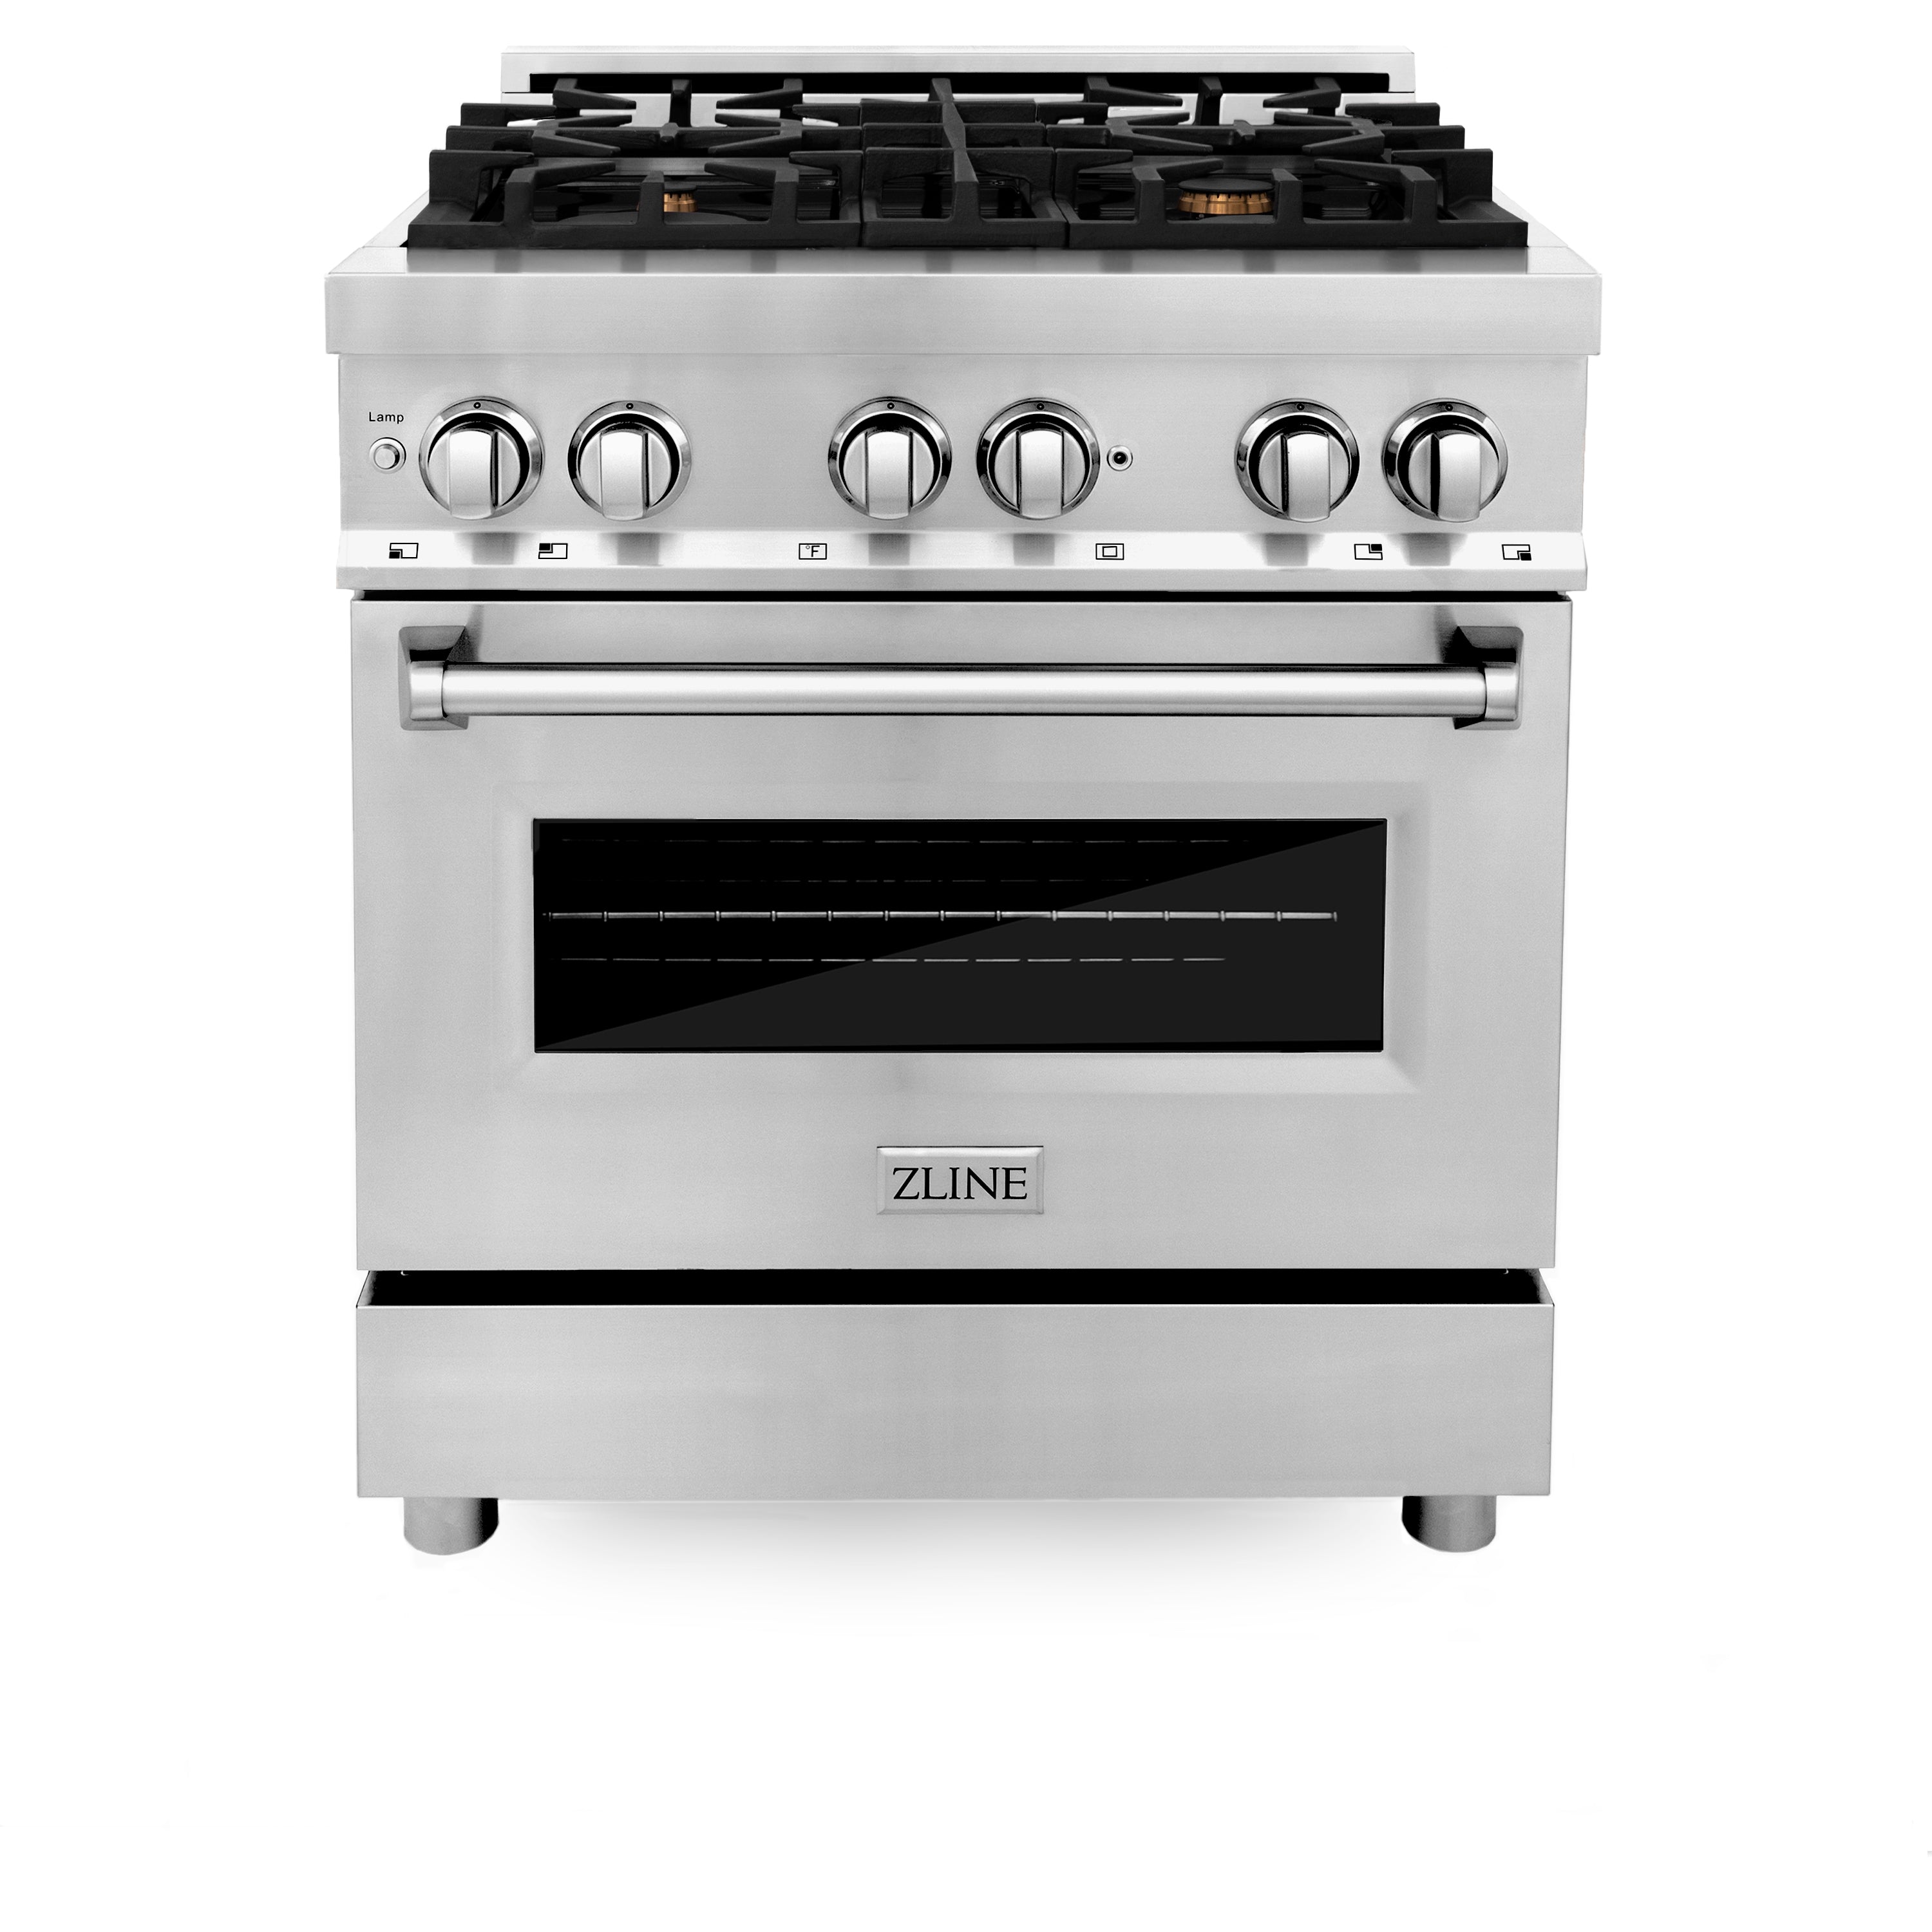 ZLINE 30" 4.0 cu. ft. Electric Oven and Gas Cooktop Dual Fuel Range with Griddle and Brass Burners in Stainless Steel (RA-BR-GR-30)